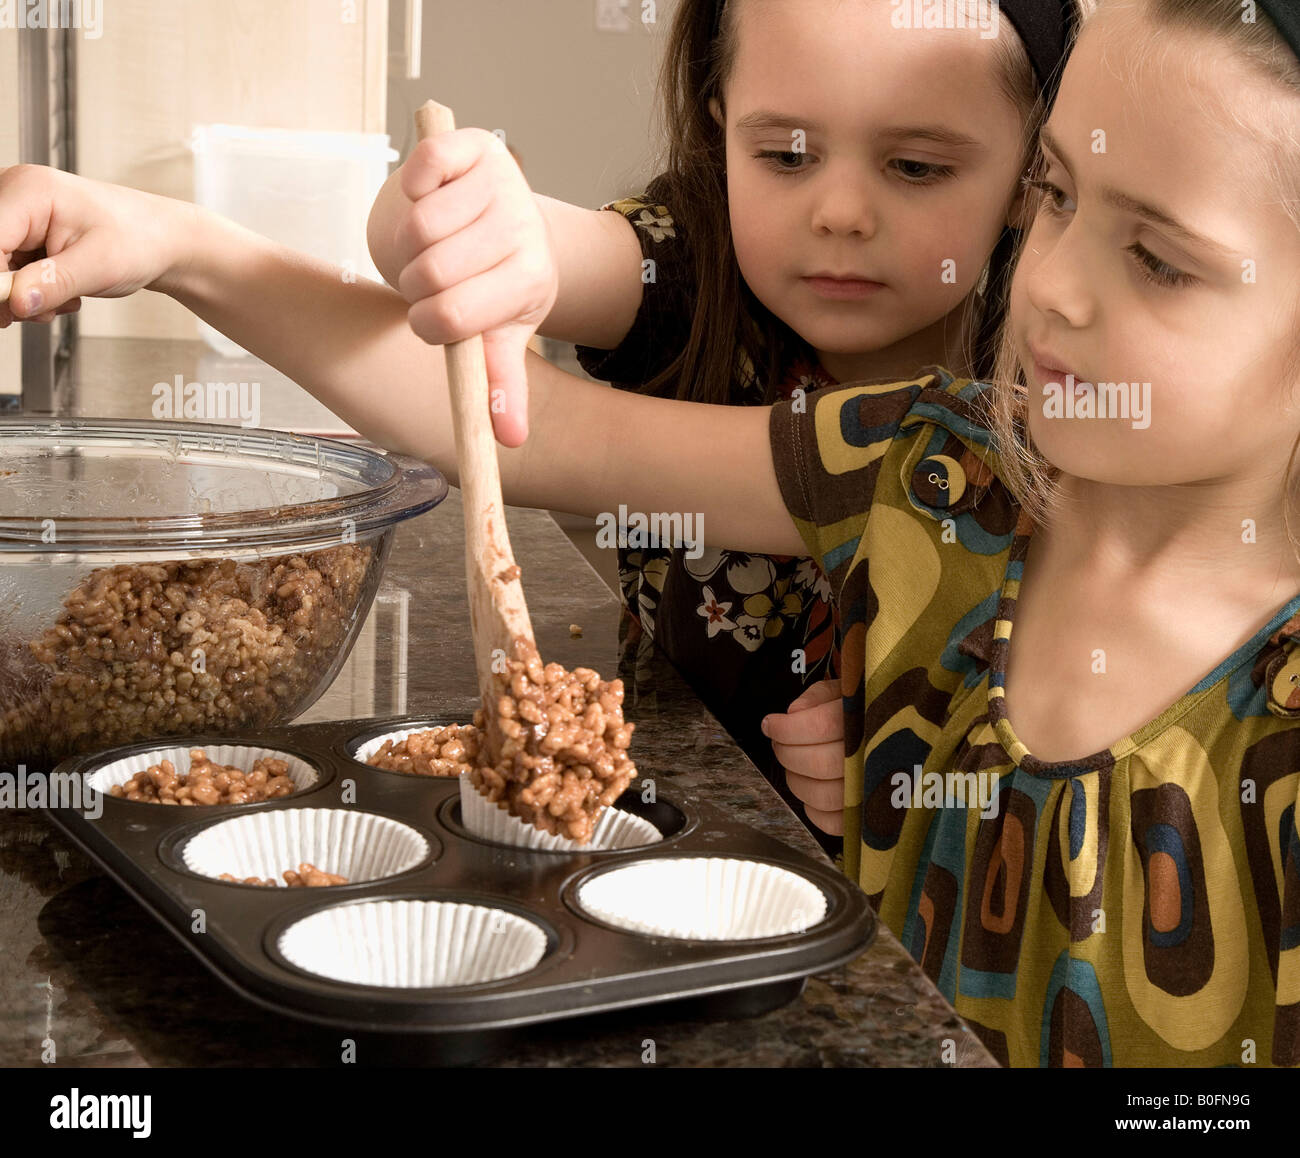 Young girls baking cakes Stock Photo